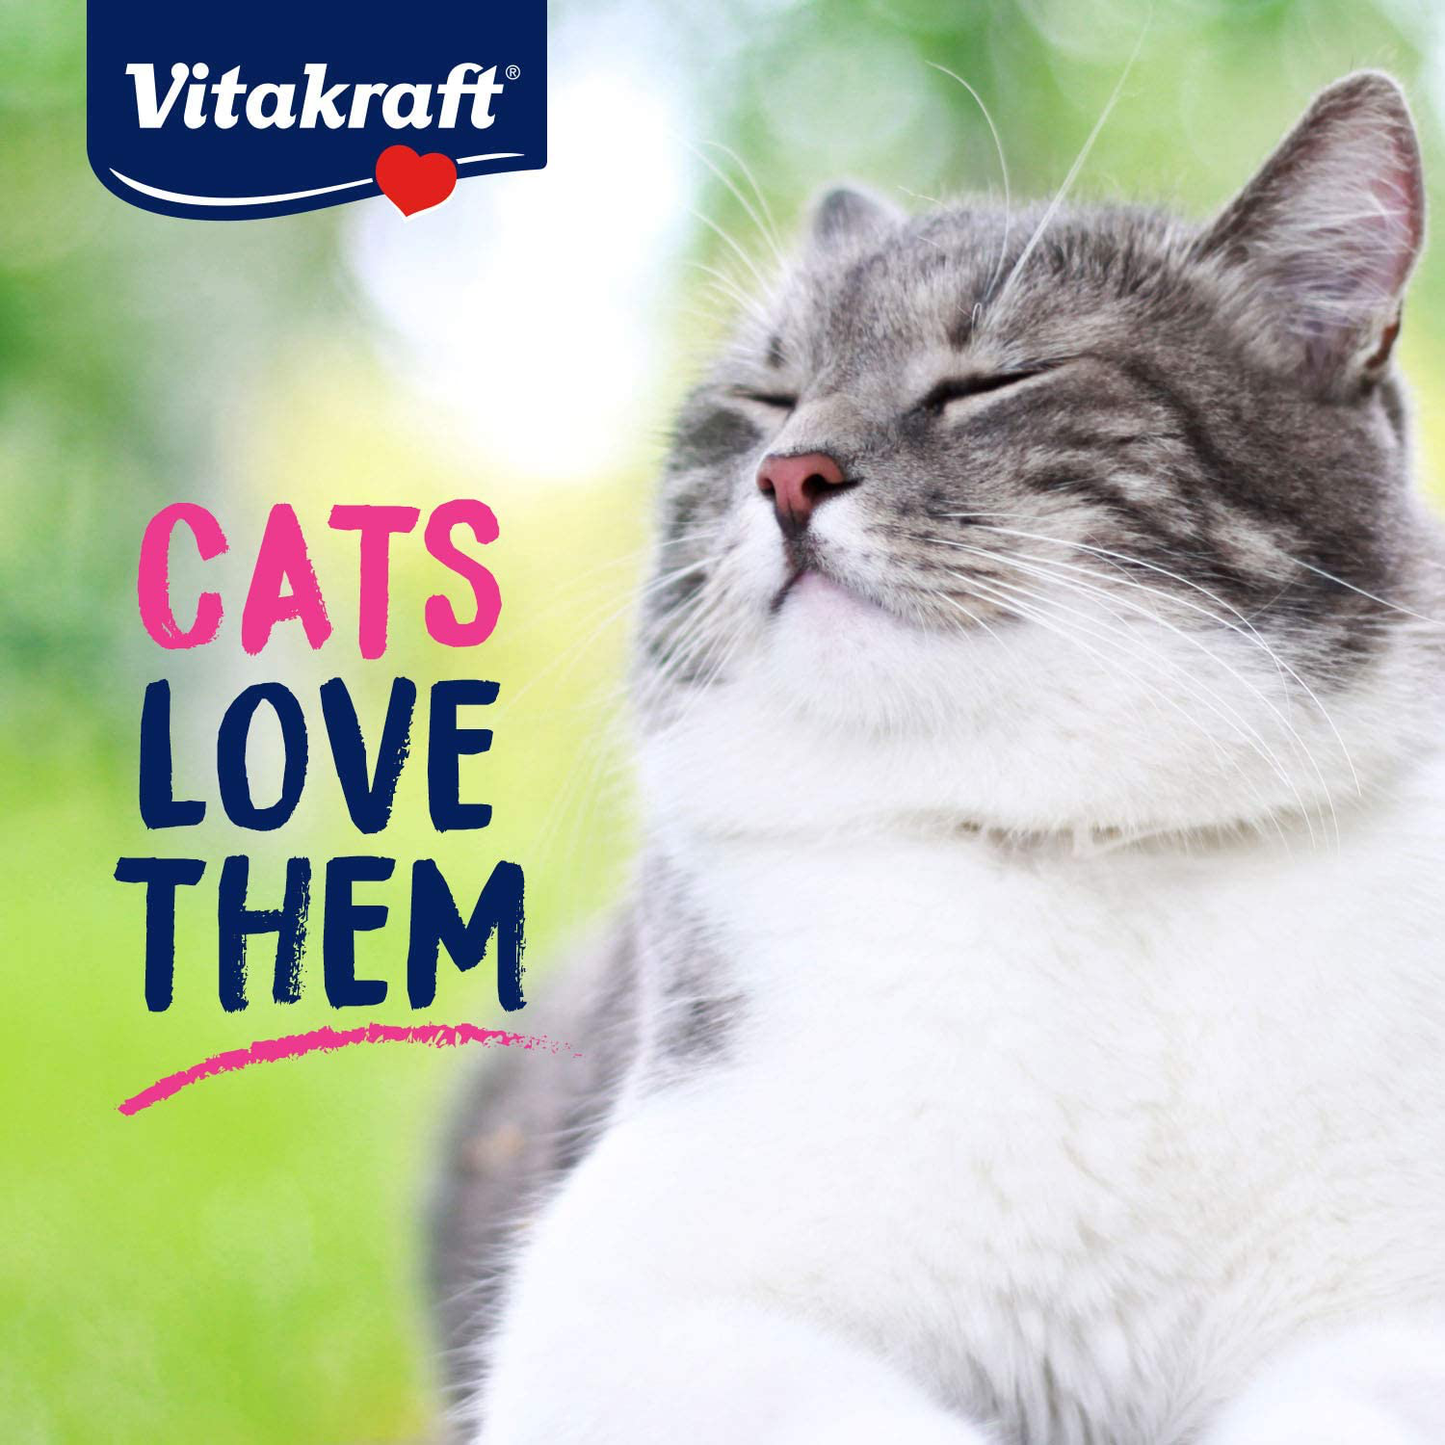 Vitakraft Souprise Snack Broth Treats for Cats, Food Topper or between Meal Snack, Adds Liquid to Your Cat'S Diet